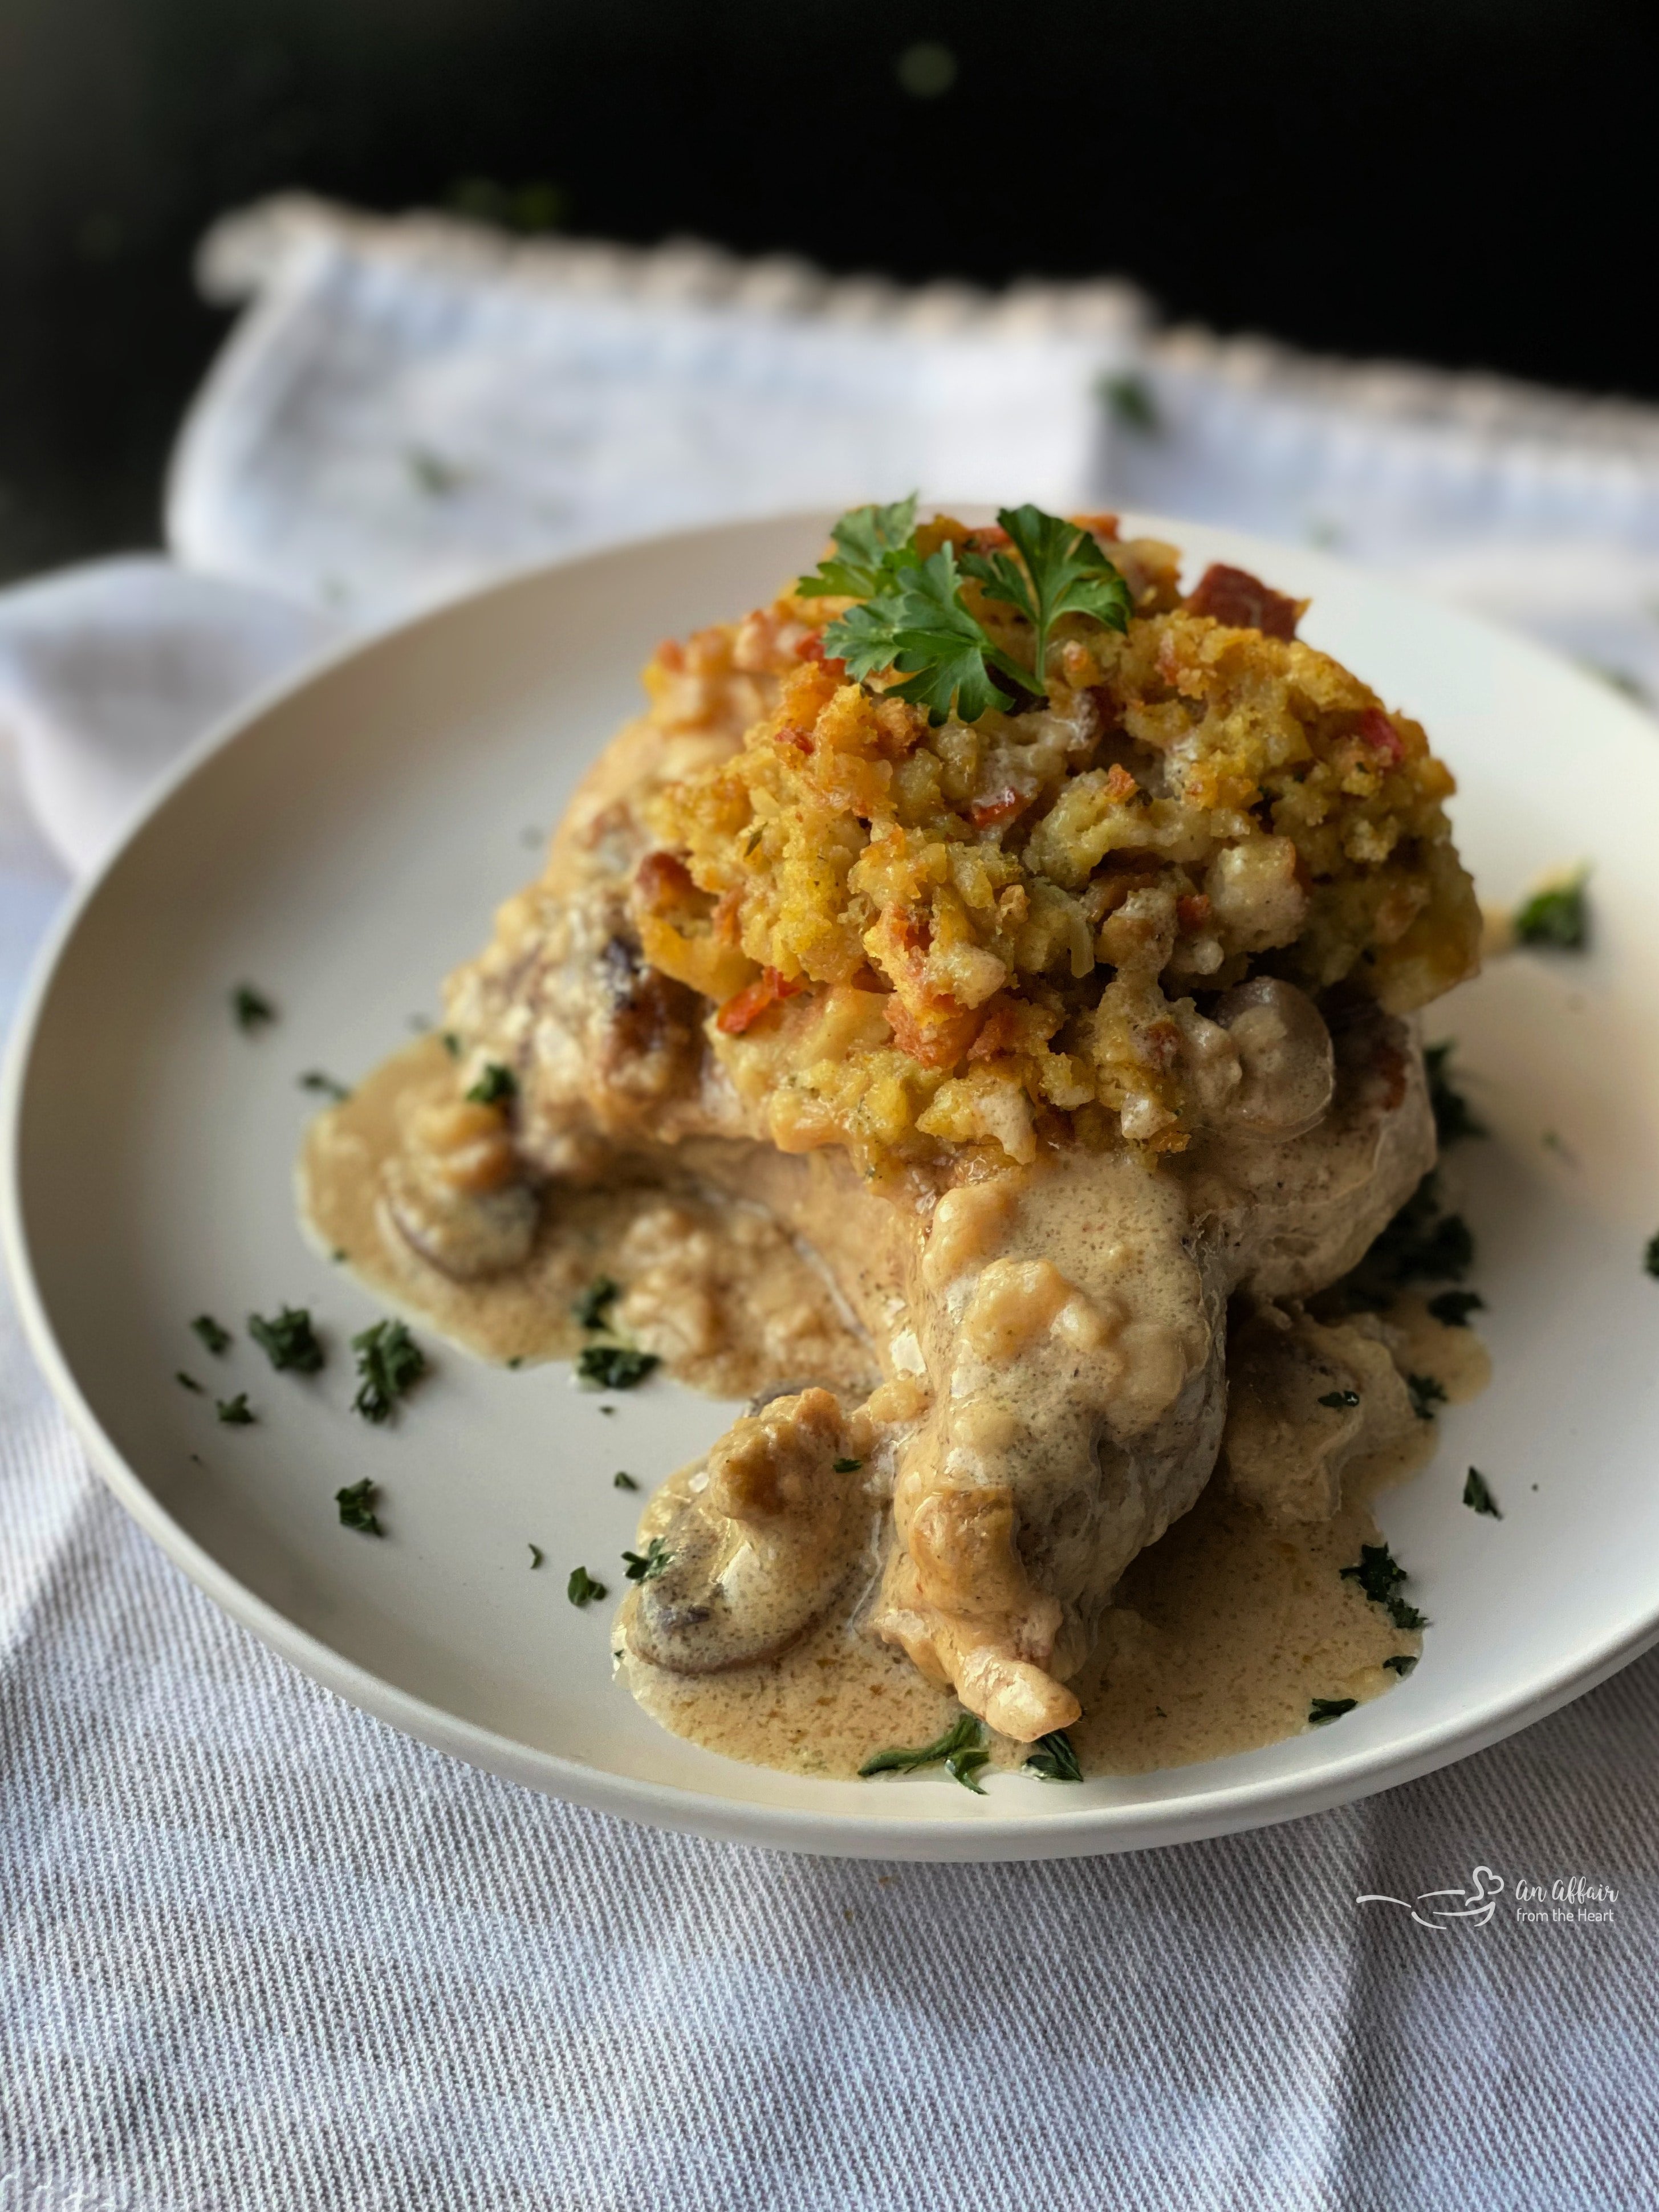 baked pork chop on plate with stuffing and herbs on top with mushroom gravy